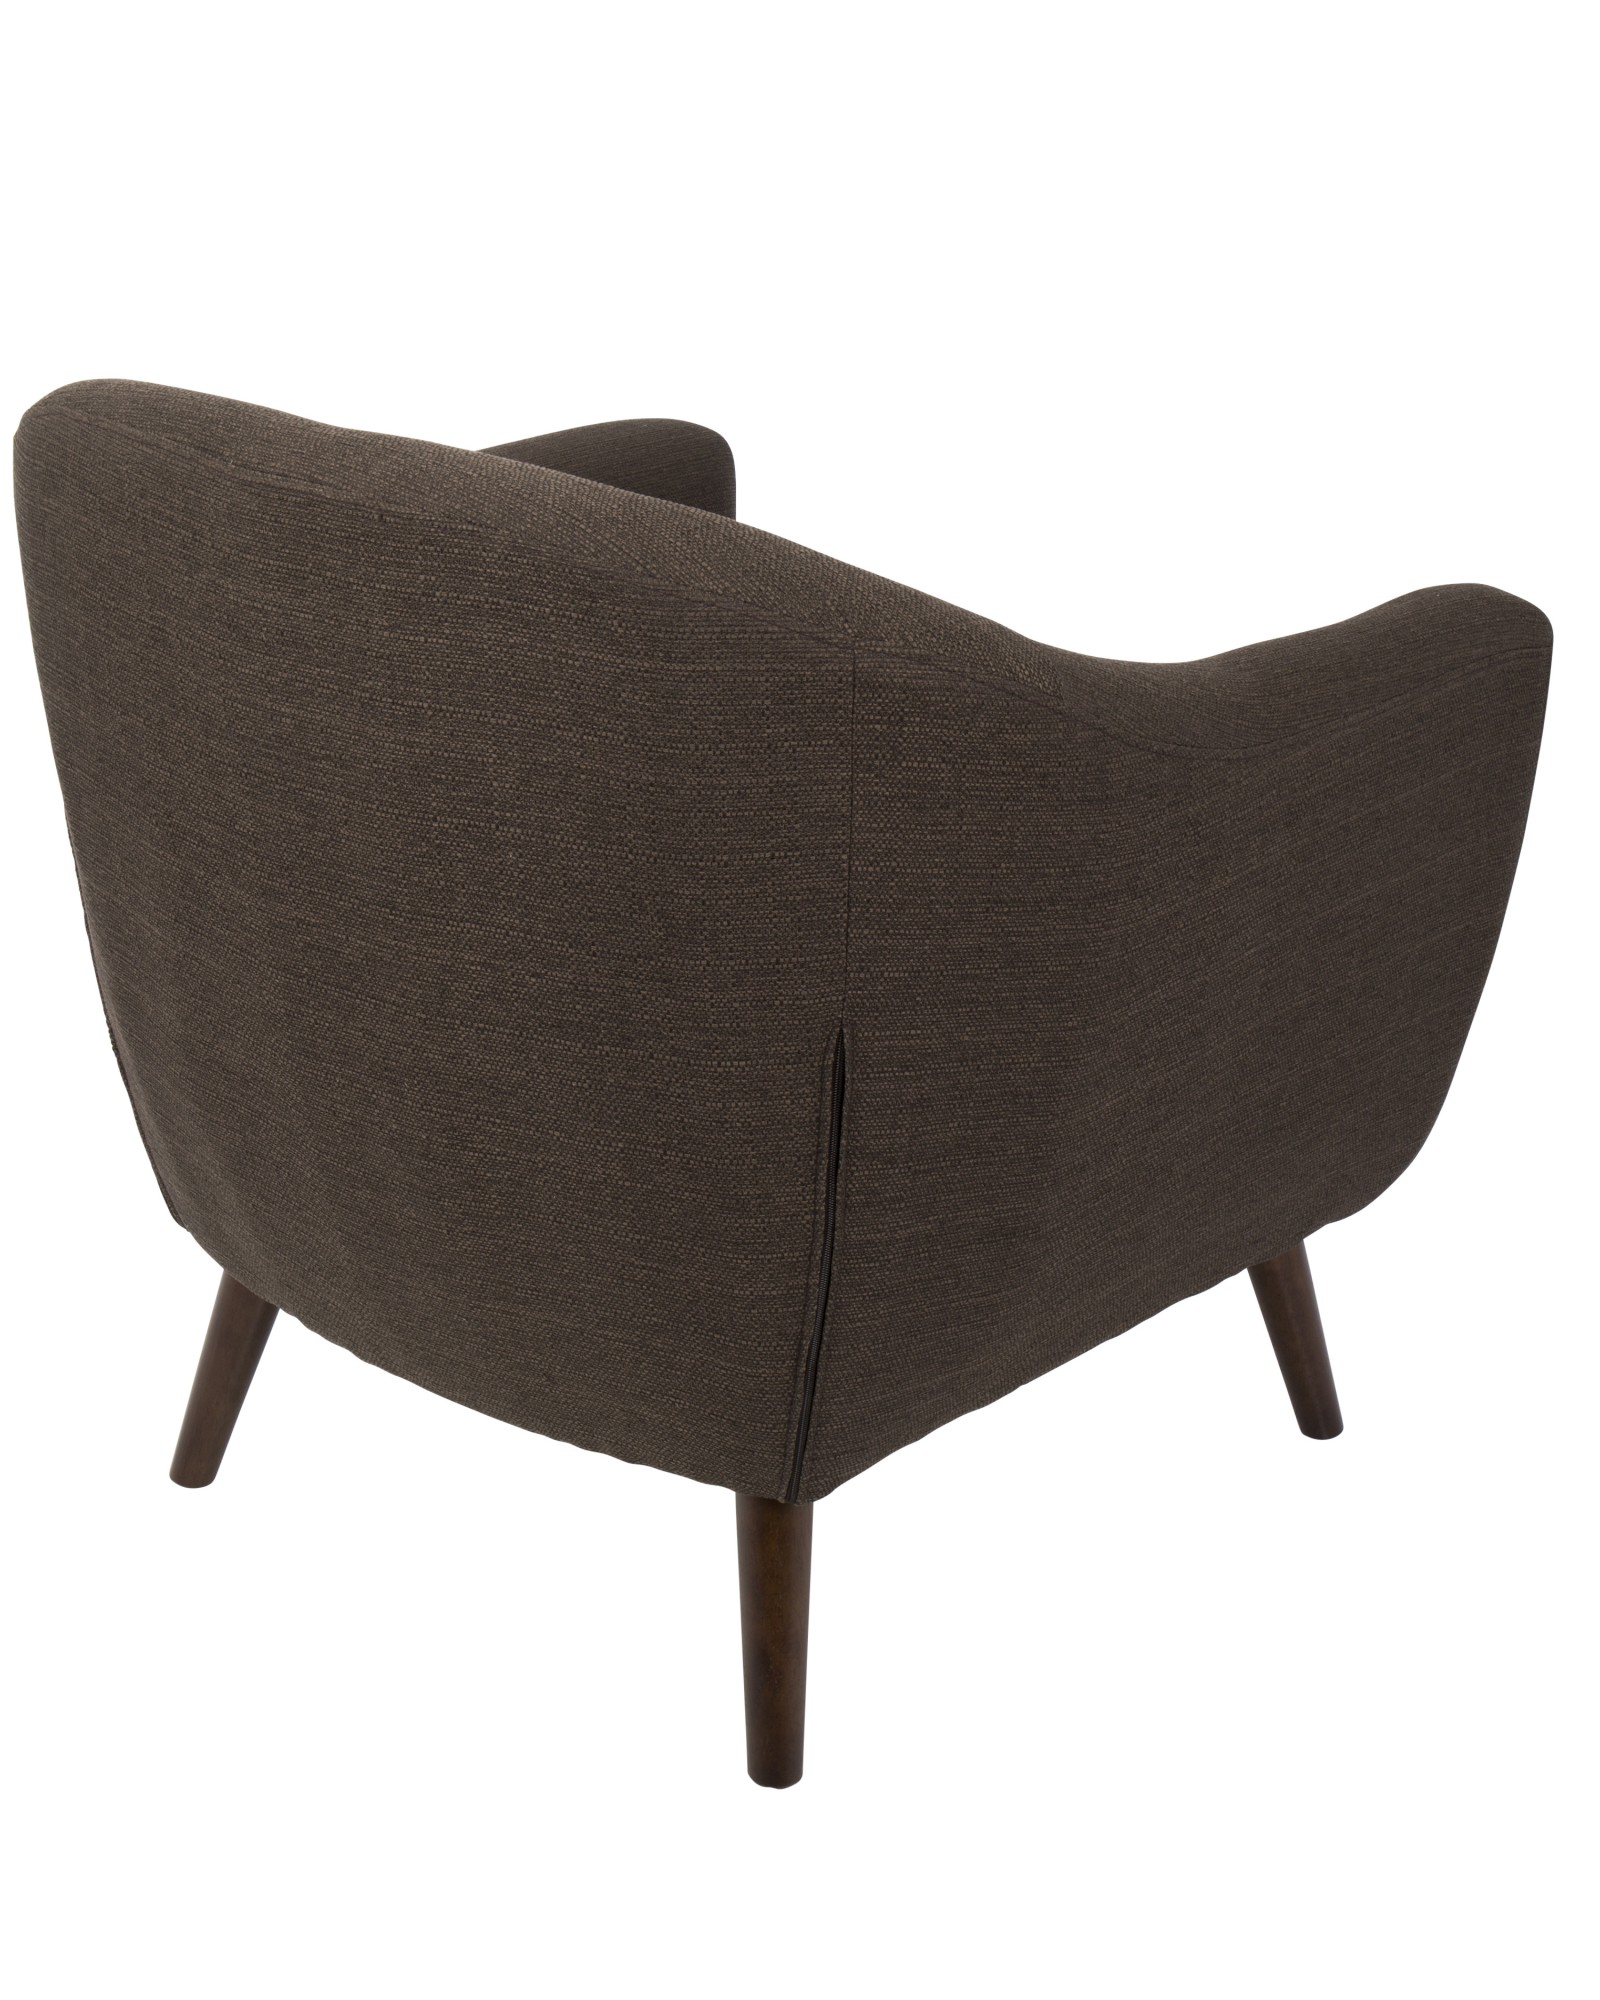 Rockwell Mid-Century Modern Accent Chair in Espresso